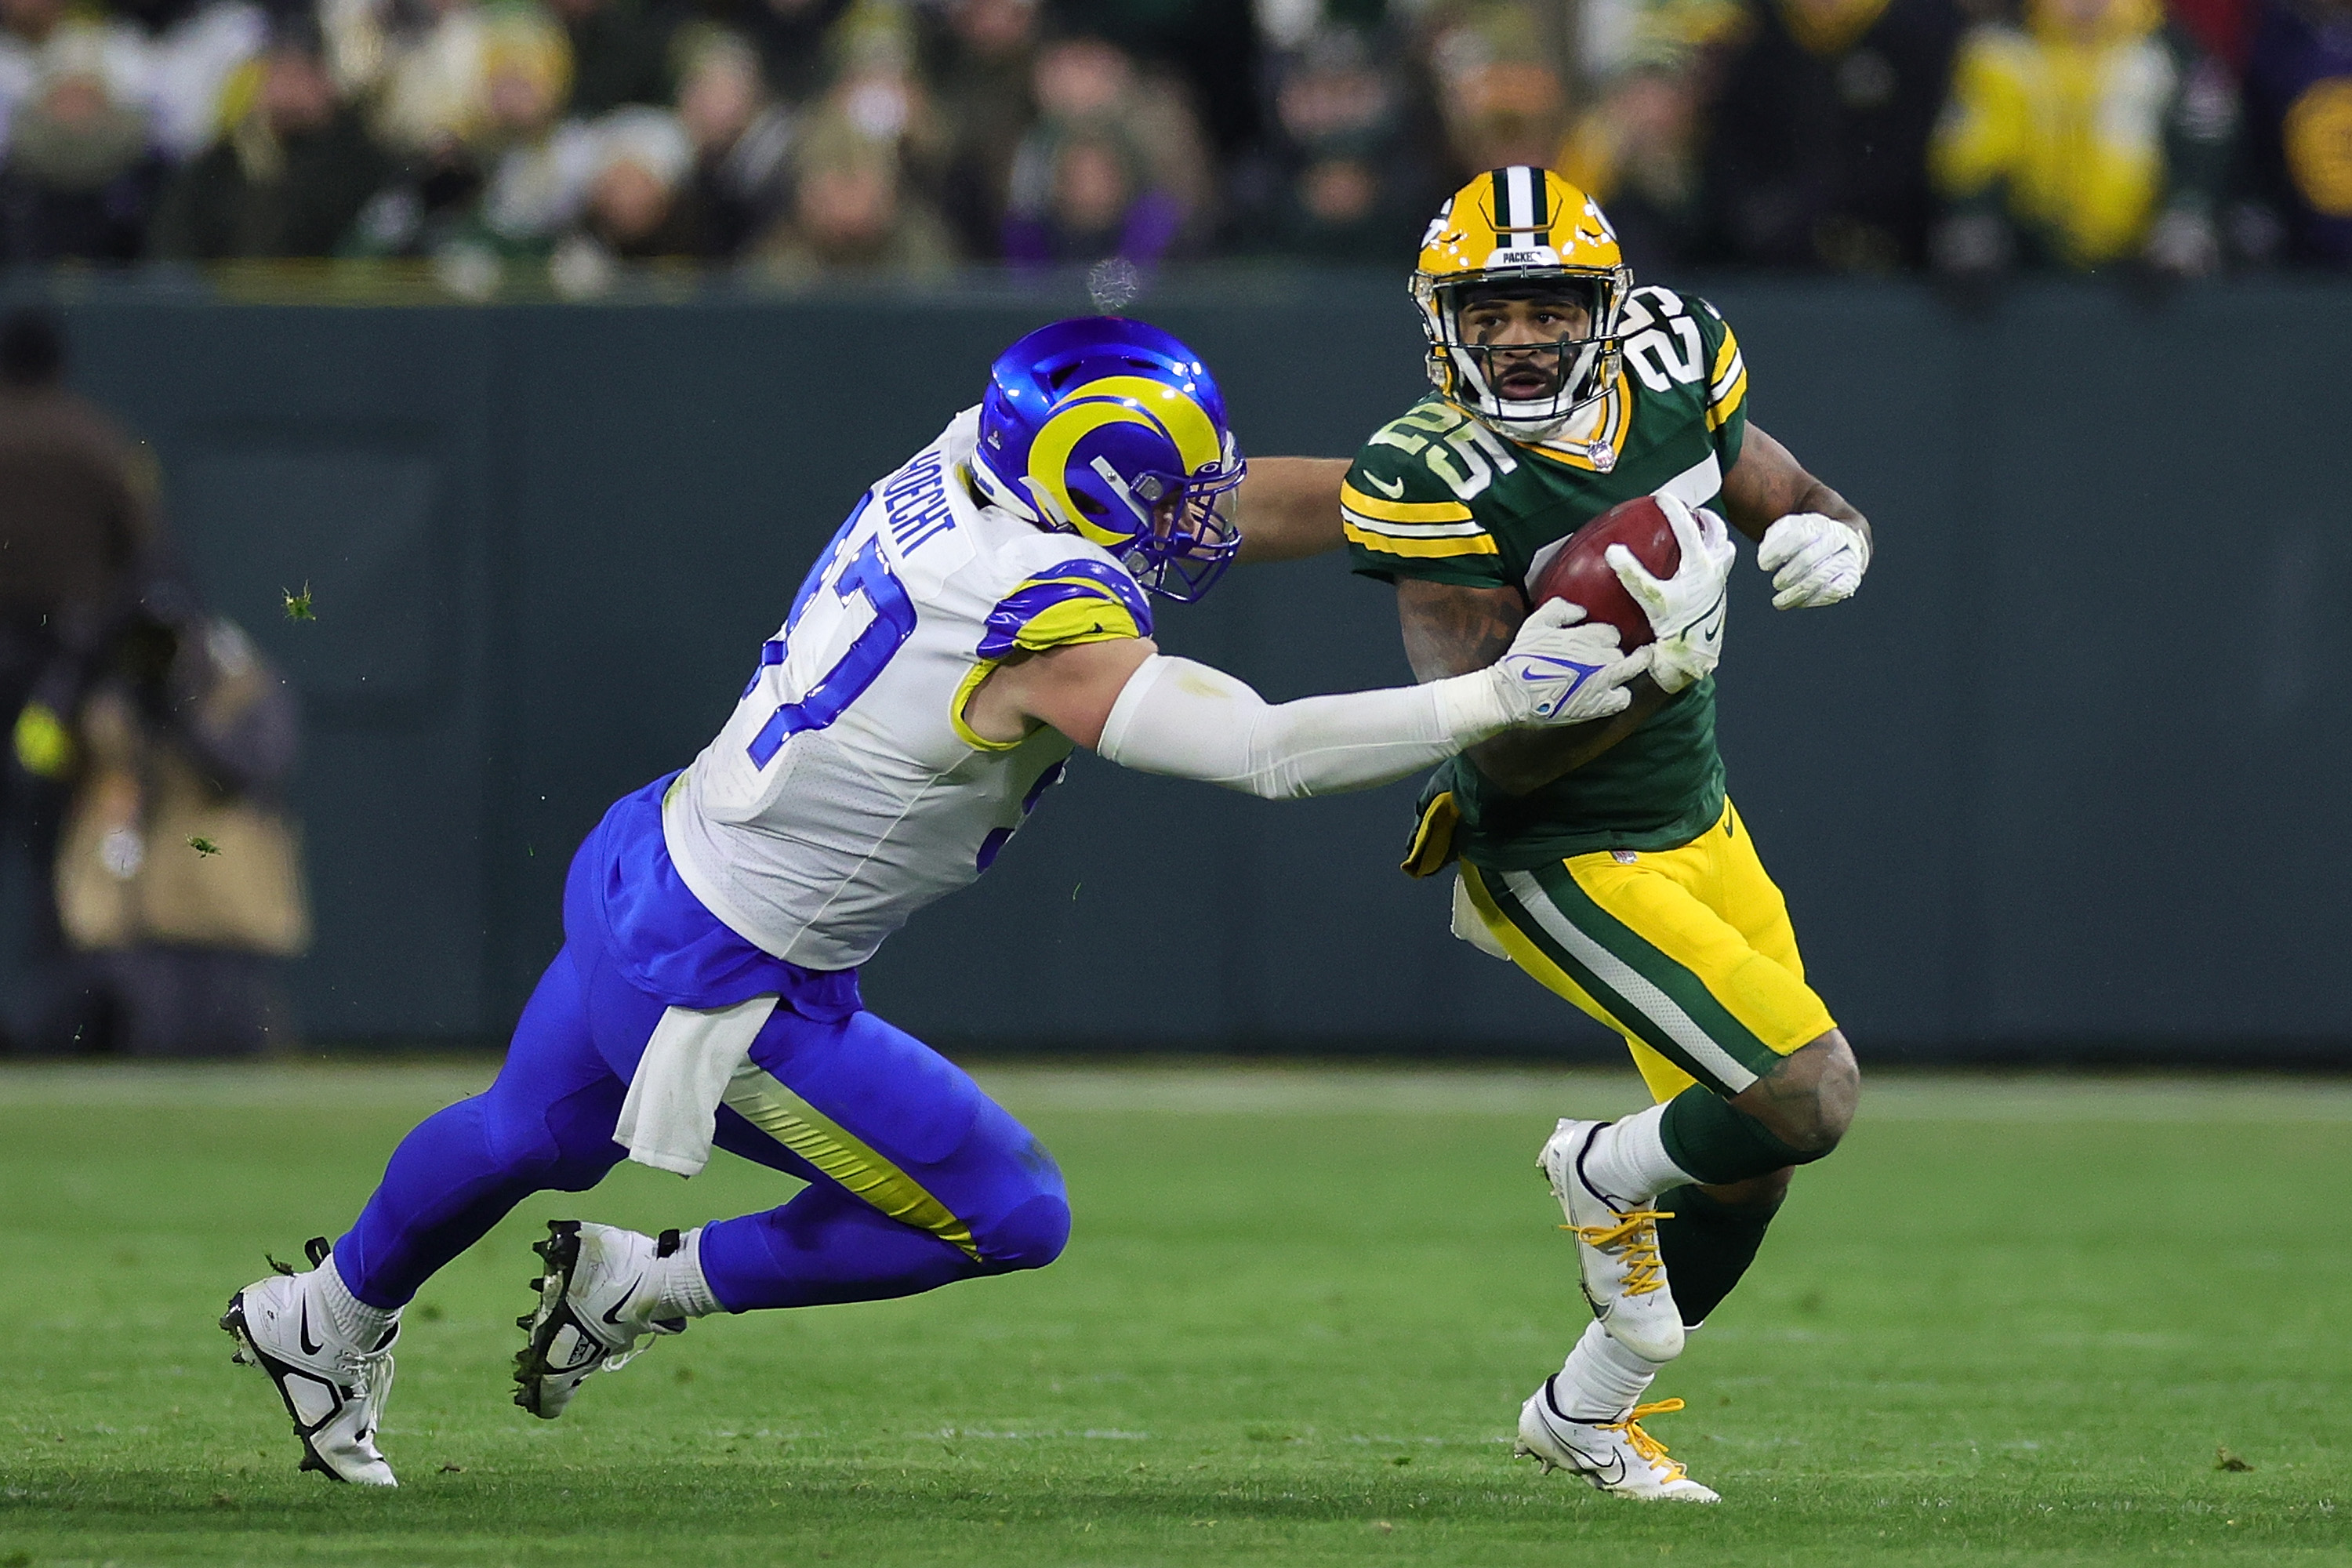 YouTube (GOOGL) Snags NFLs Sunday Ticket Rights in Latest Shift Online